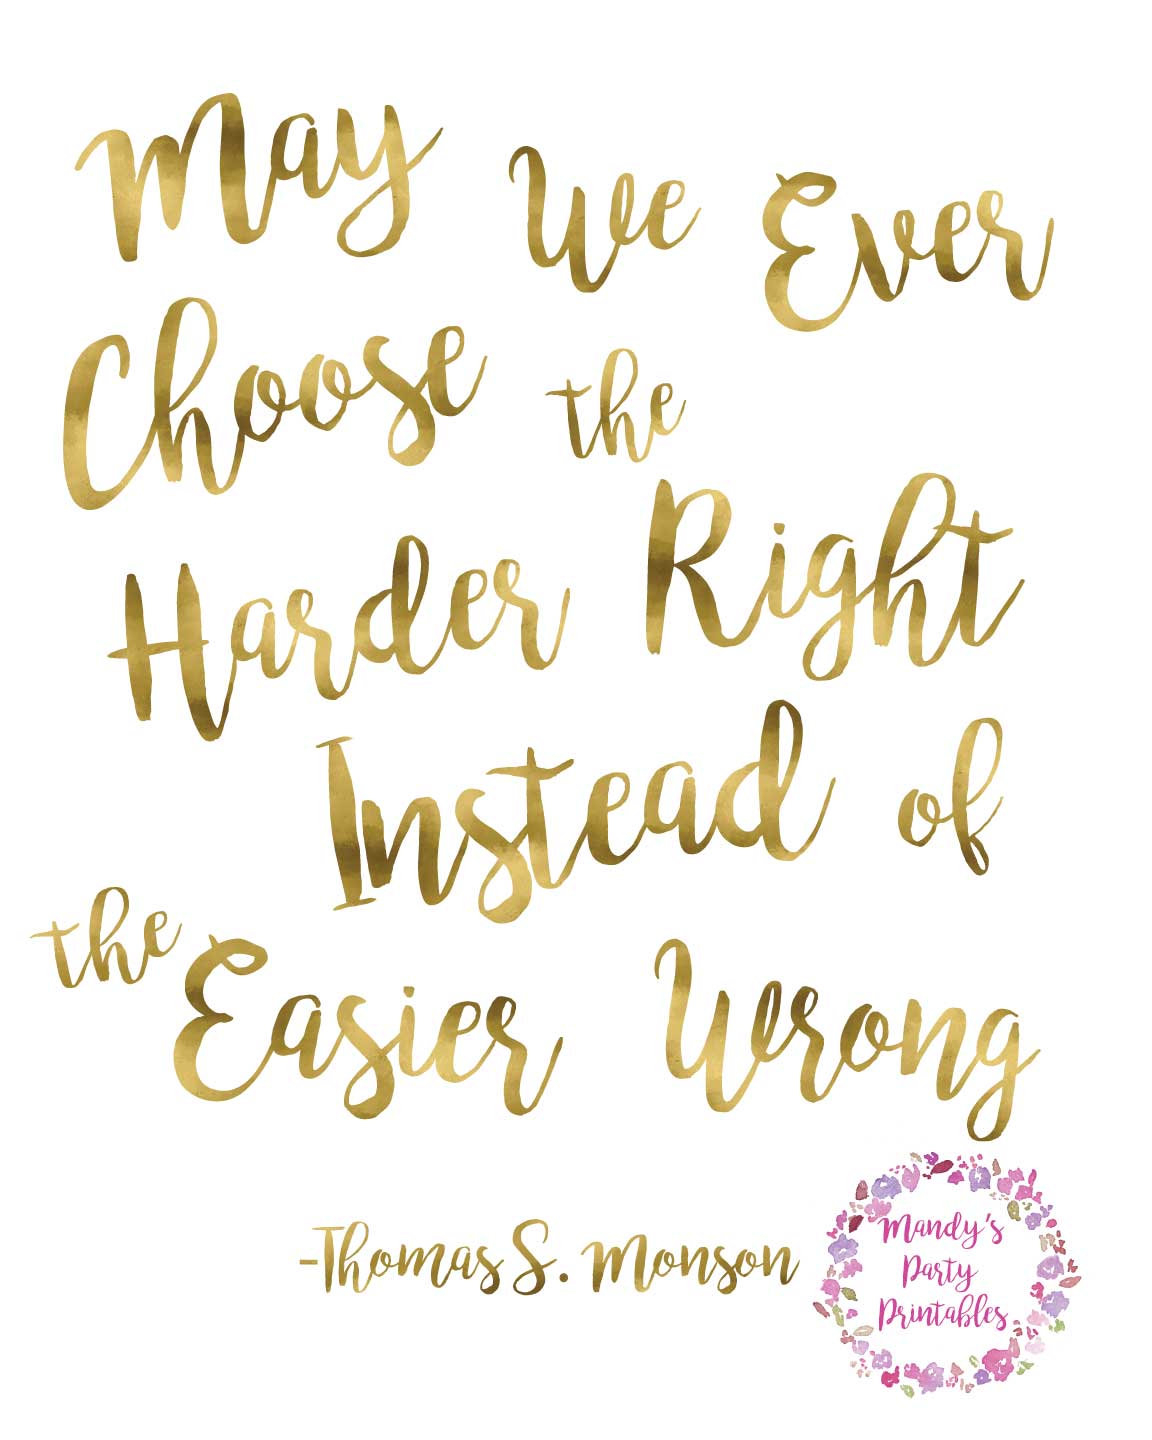 May We Ever Choose the Harder Right Instead of the Easier Wrong -Thomas S Monson via Mandy's Party Printables